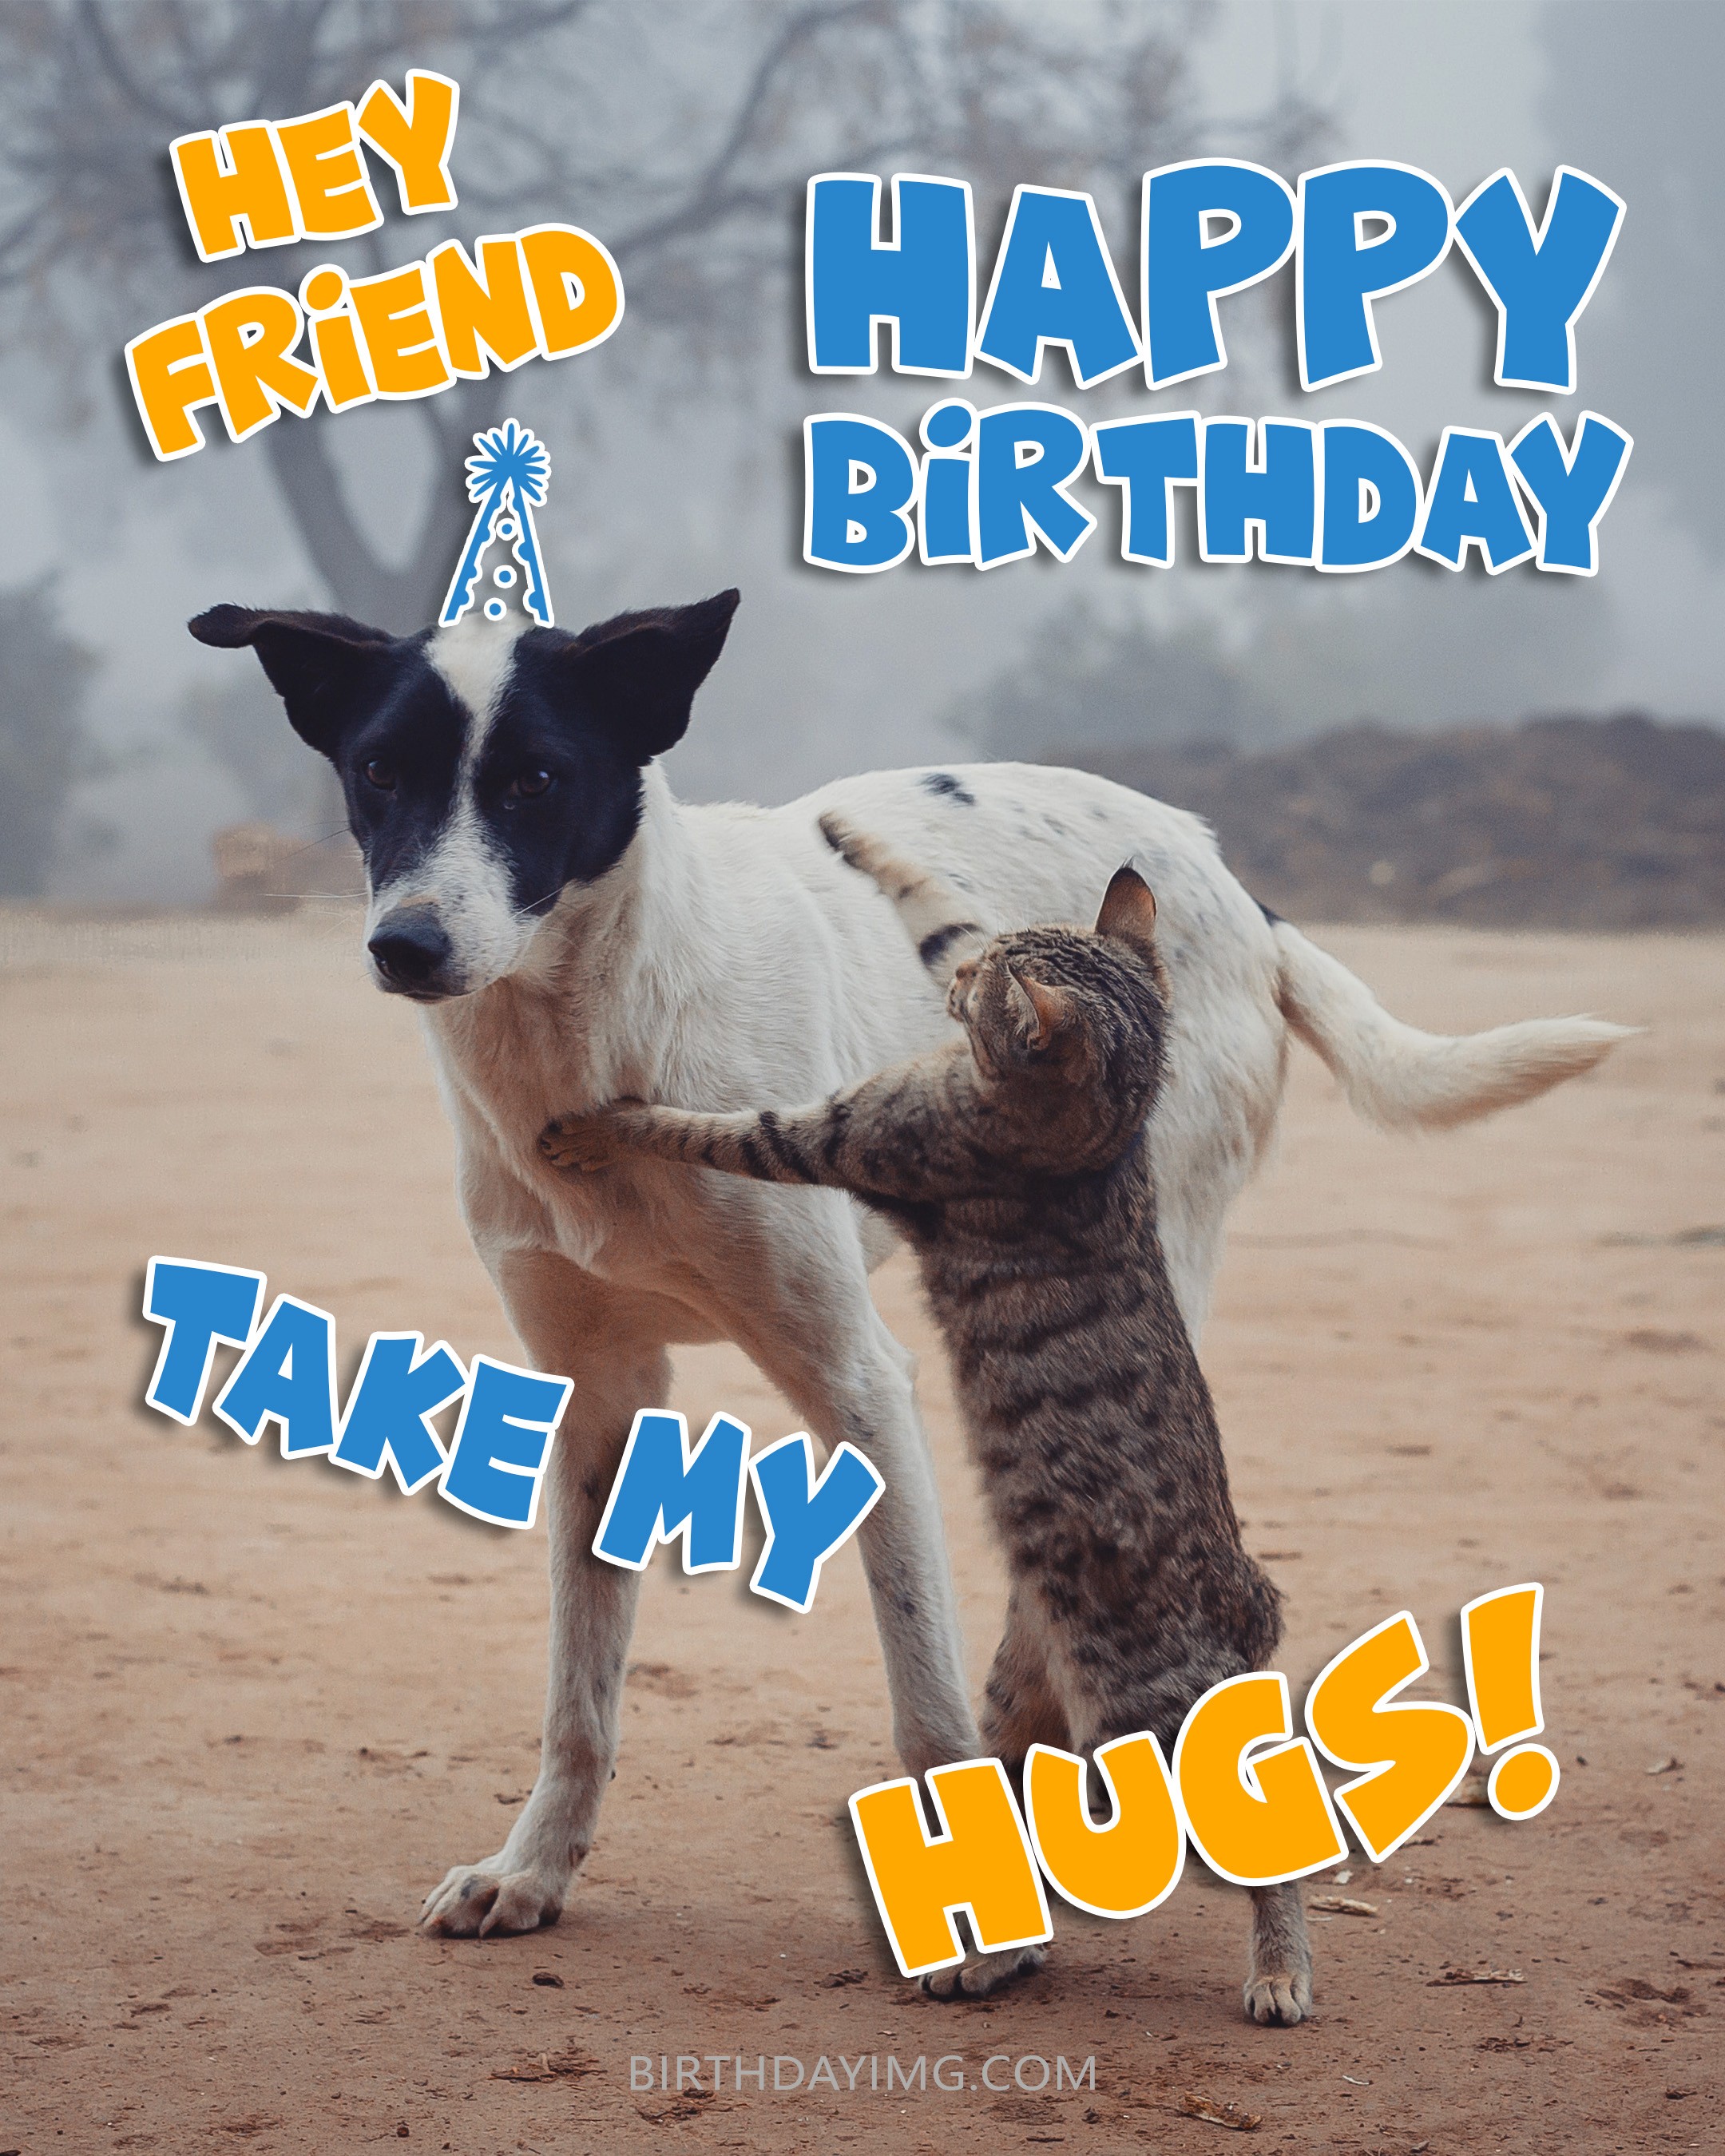 Free Friend Happy Birthday Image With Funny Cat And Dog 